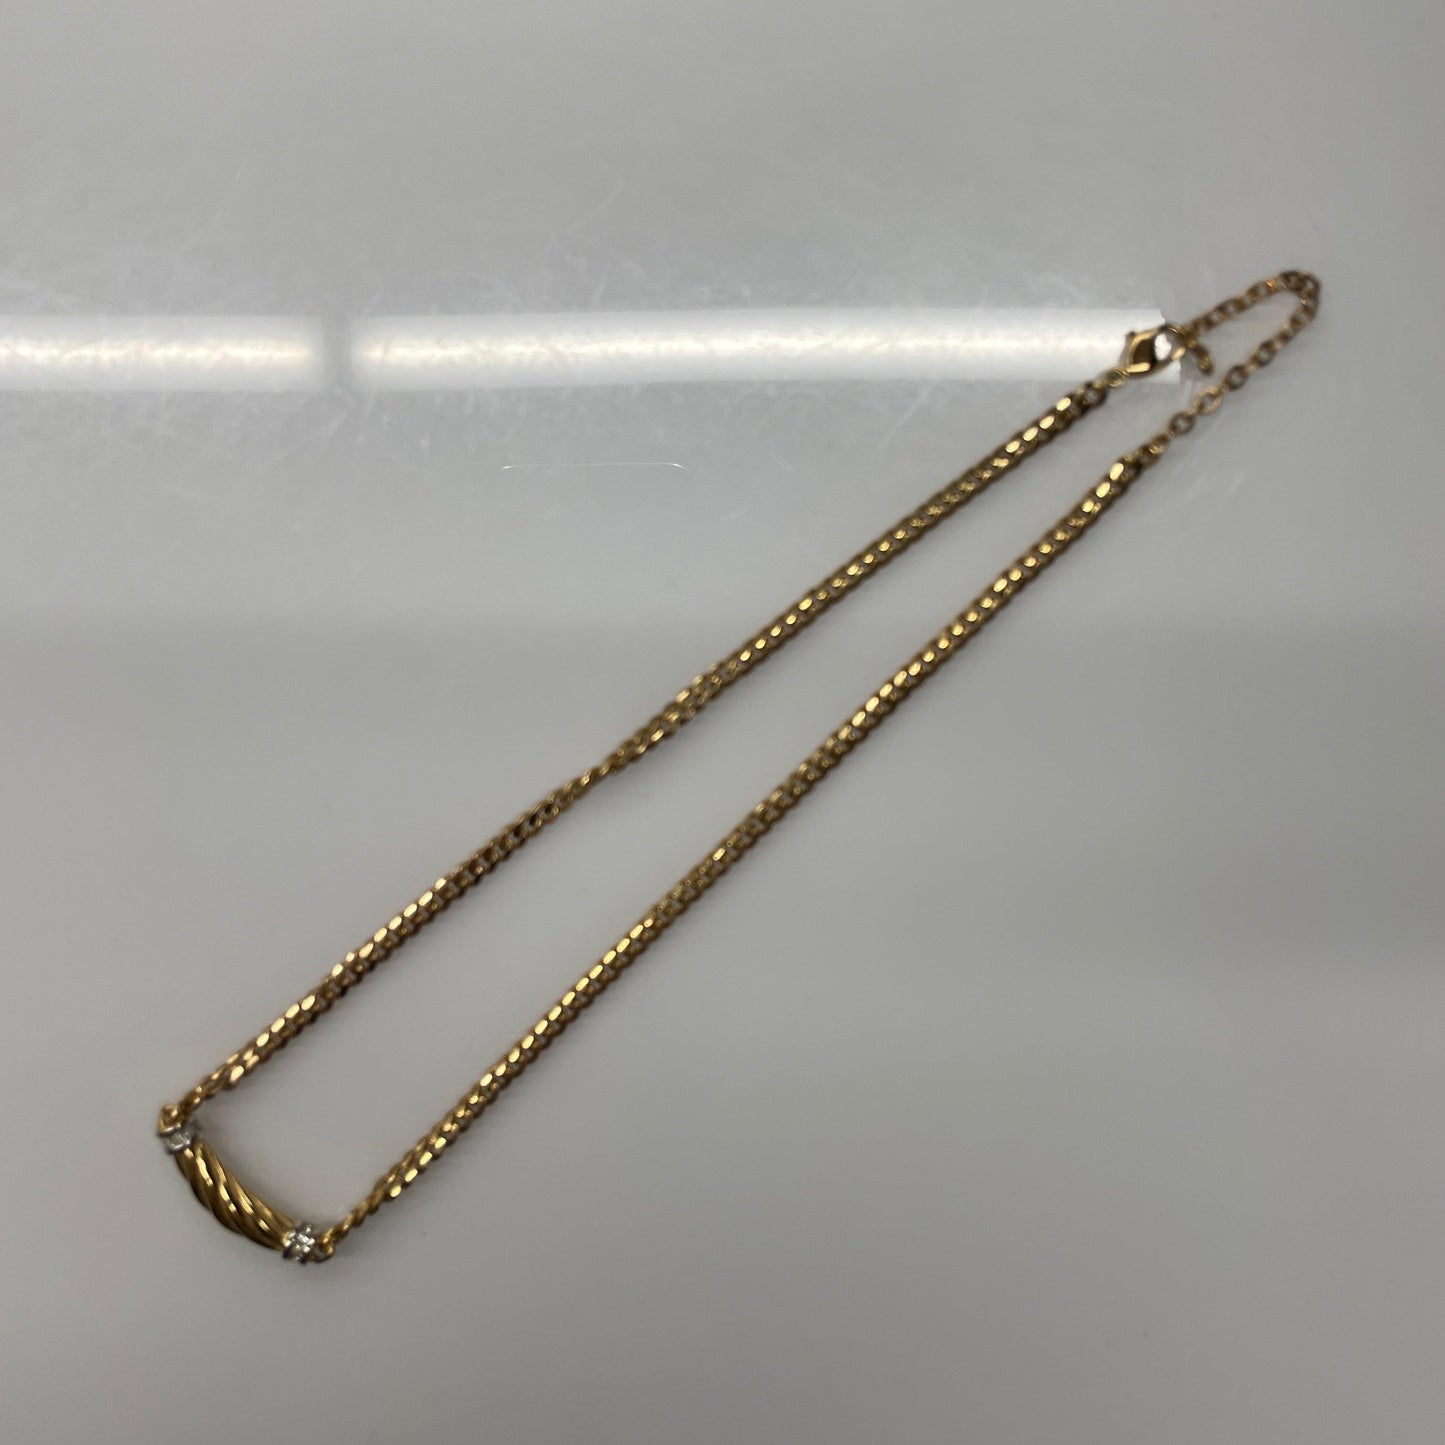 Burberry necklace